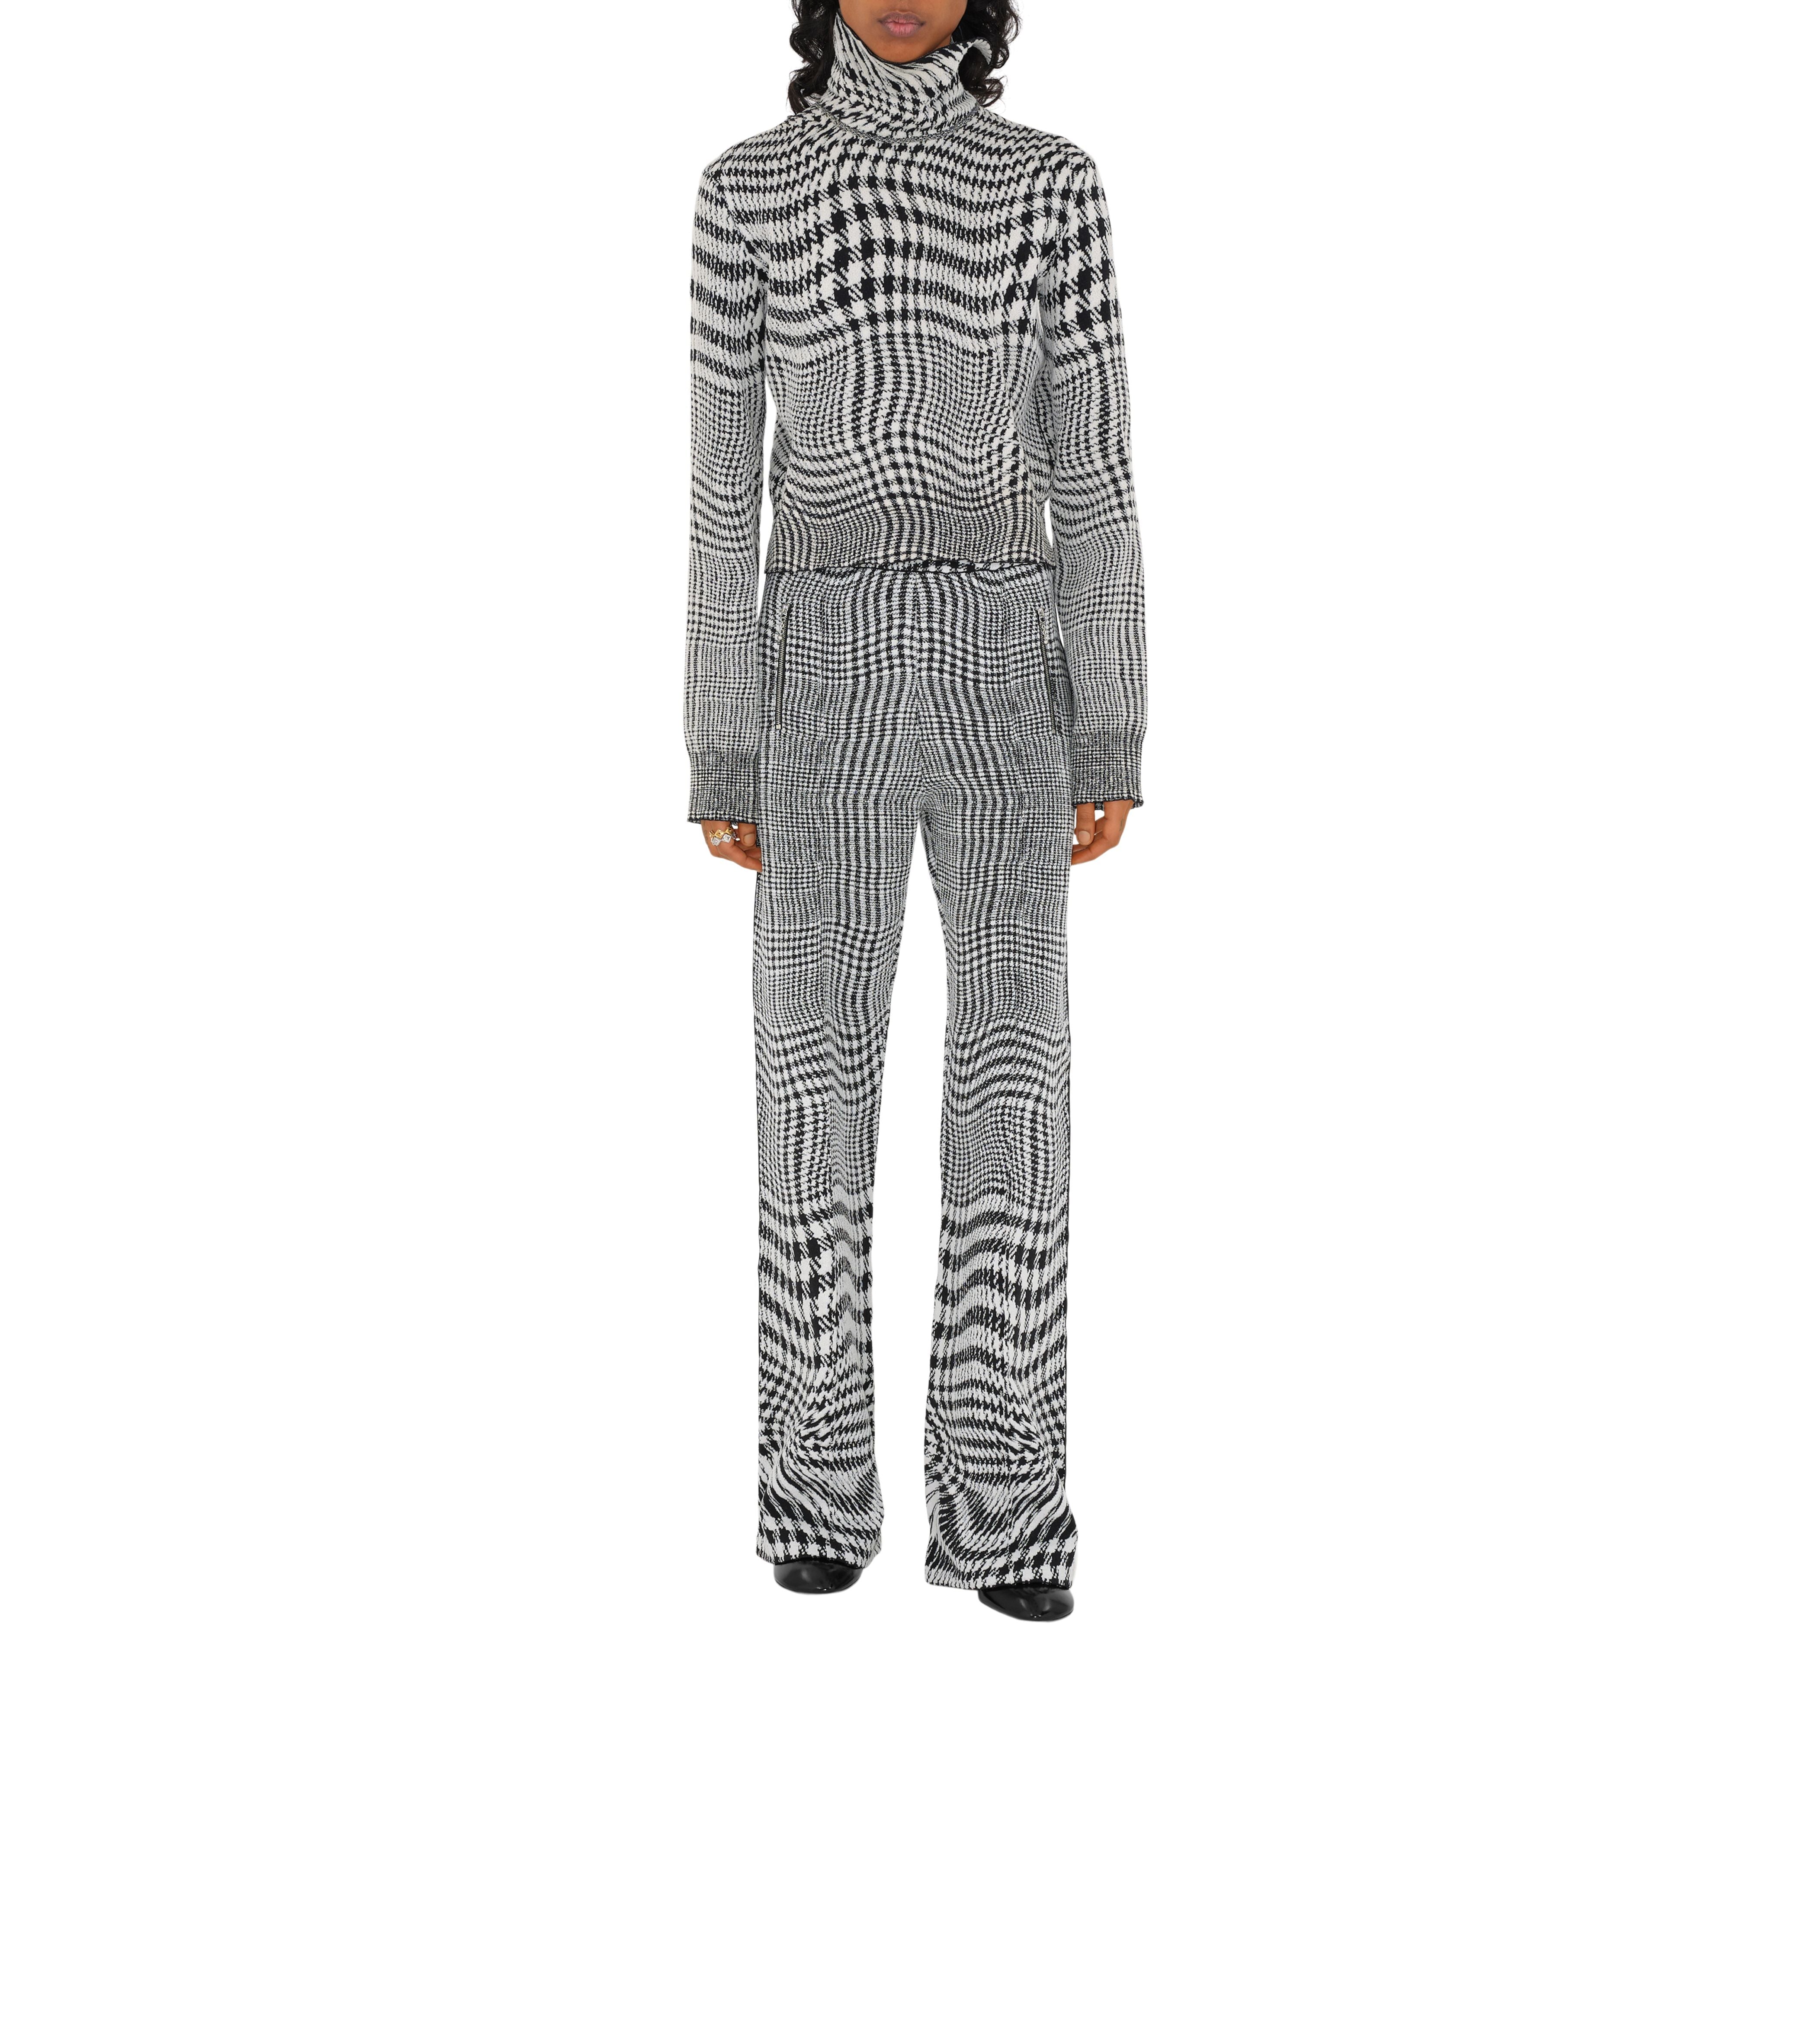 BURBERRY | WARPED HOUNDSTOOTH WOOL BLEND TROUSERS